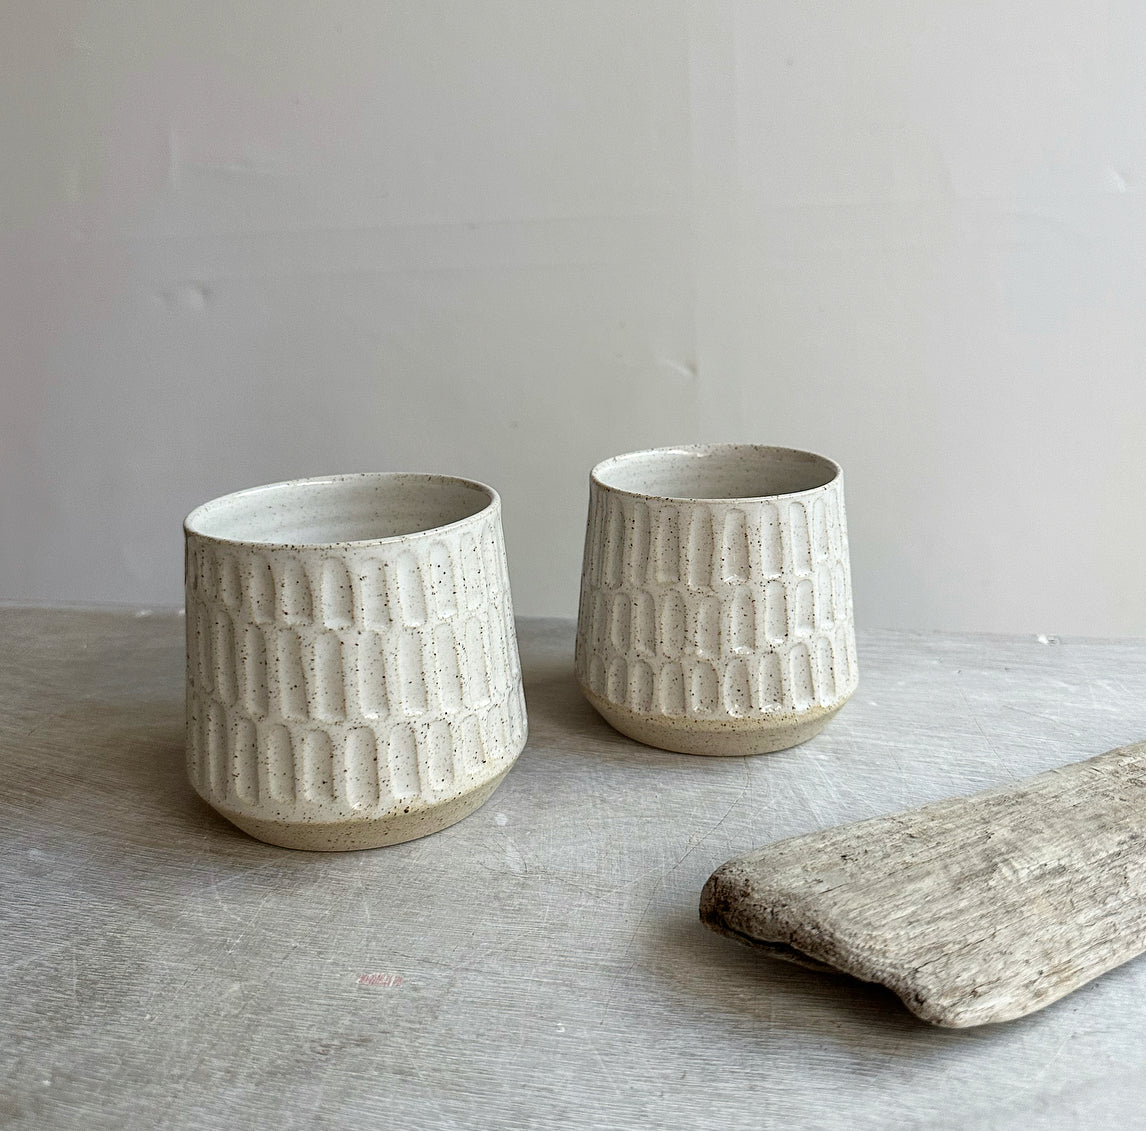 Set of two Cono Cups